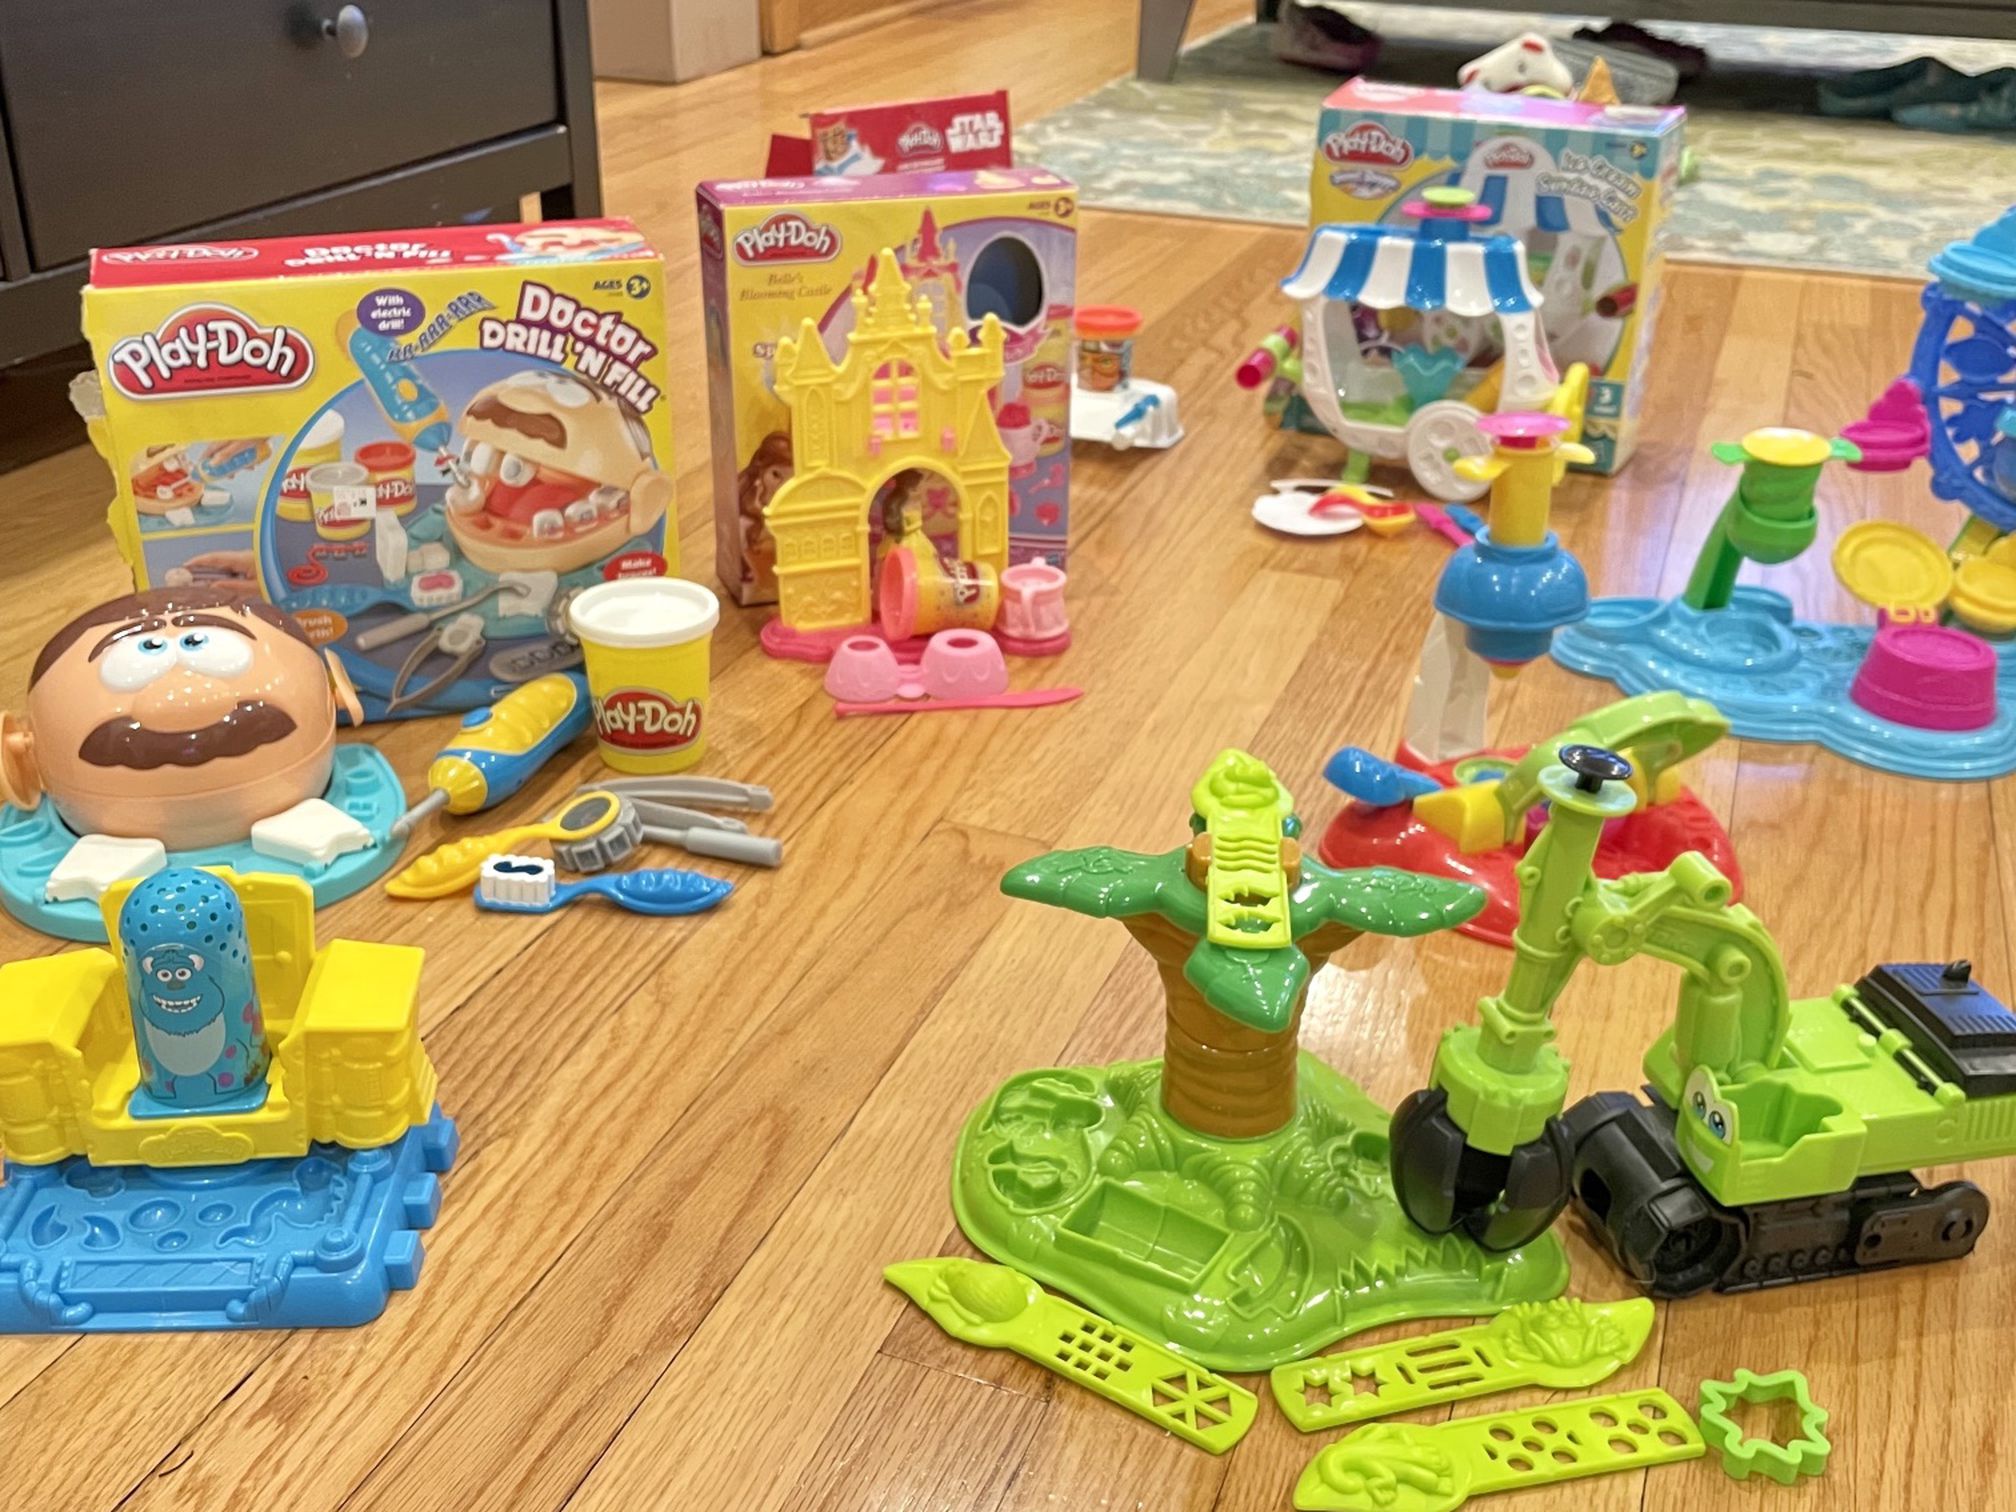 Eight Play-Doh sets, Like New